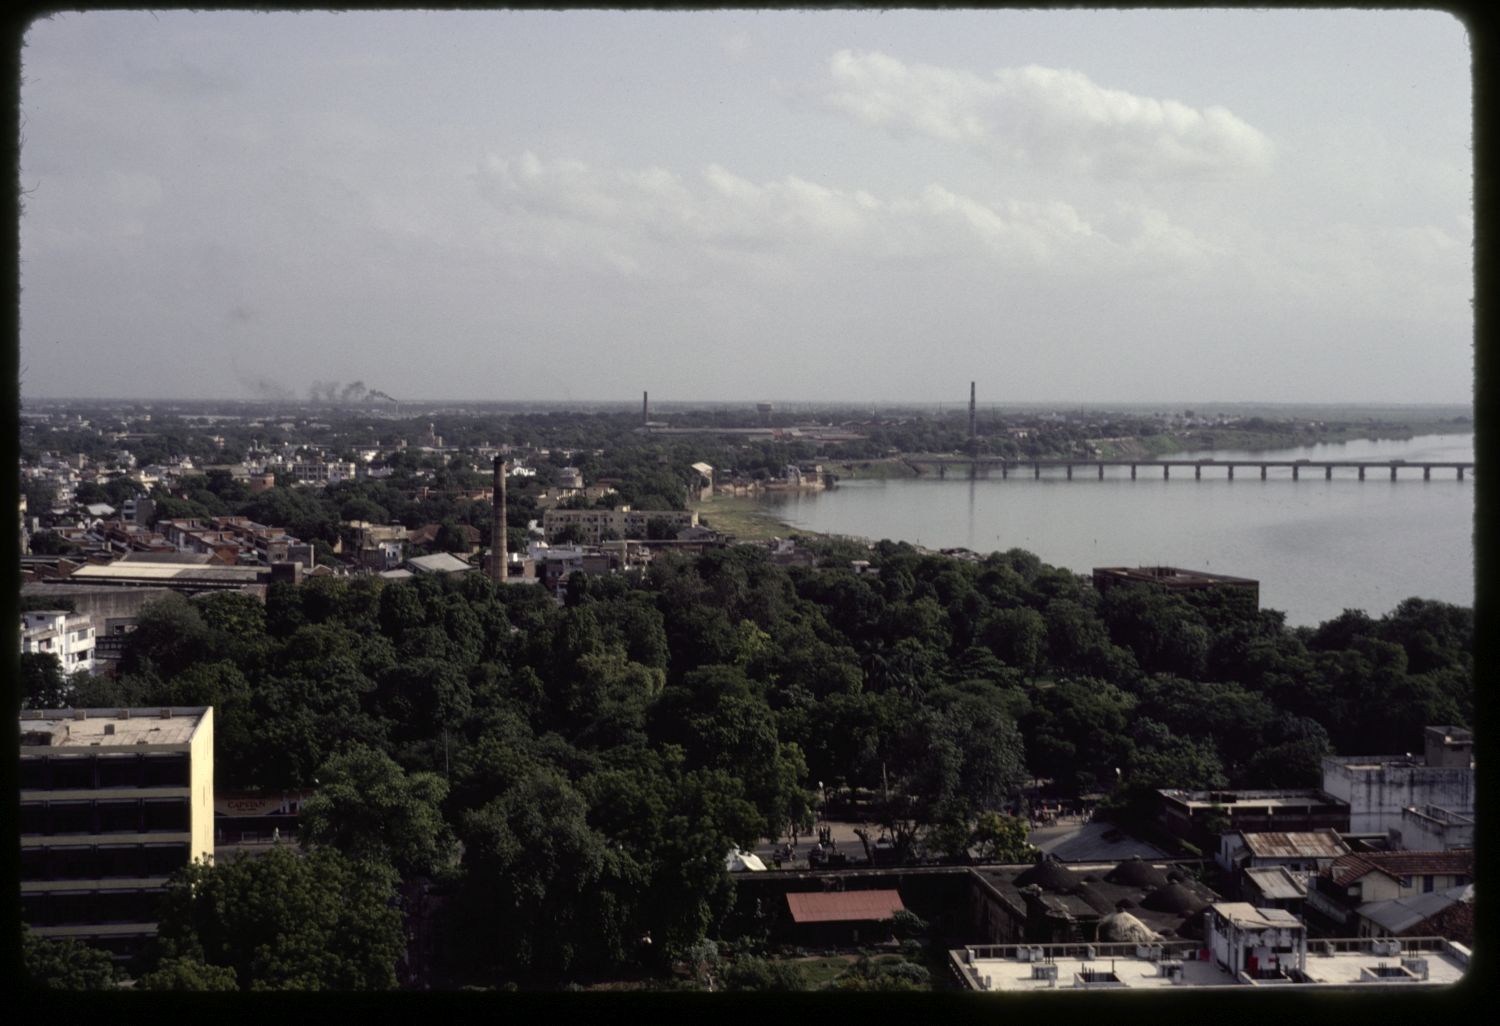 General view over suburbs. The Sabarmati River is visible at right.